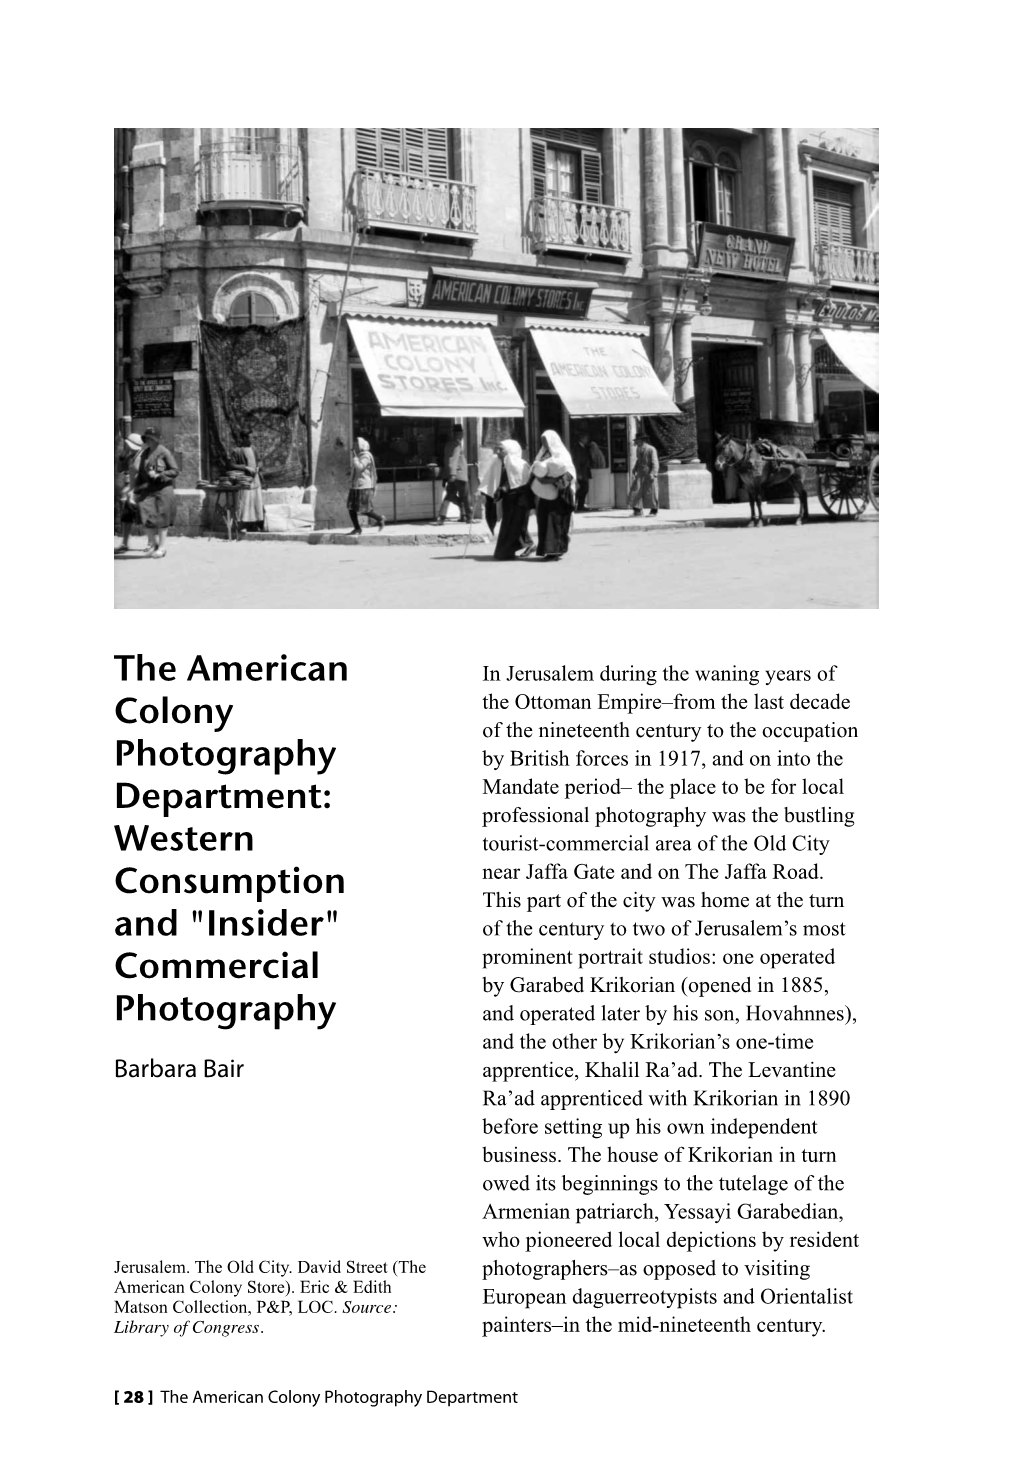 The American Colony Photography Department